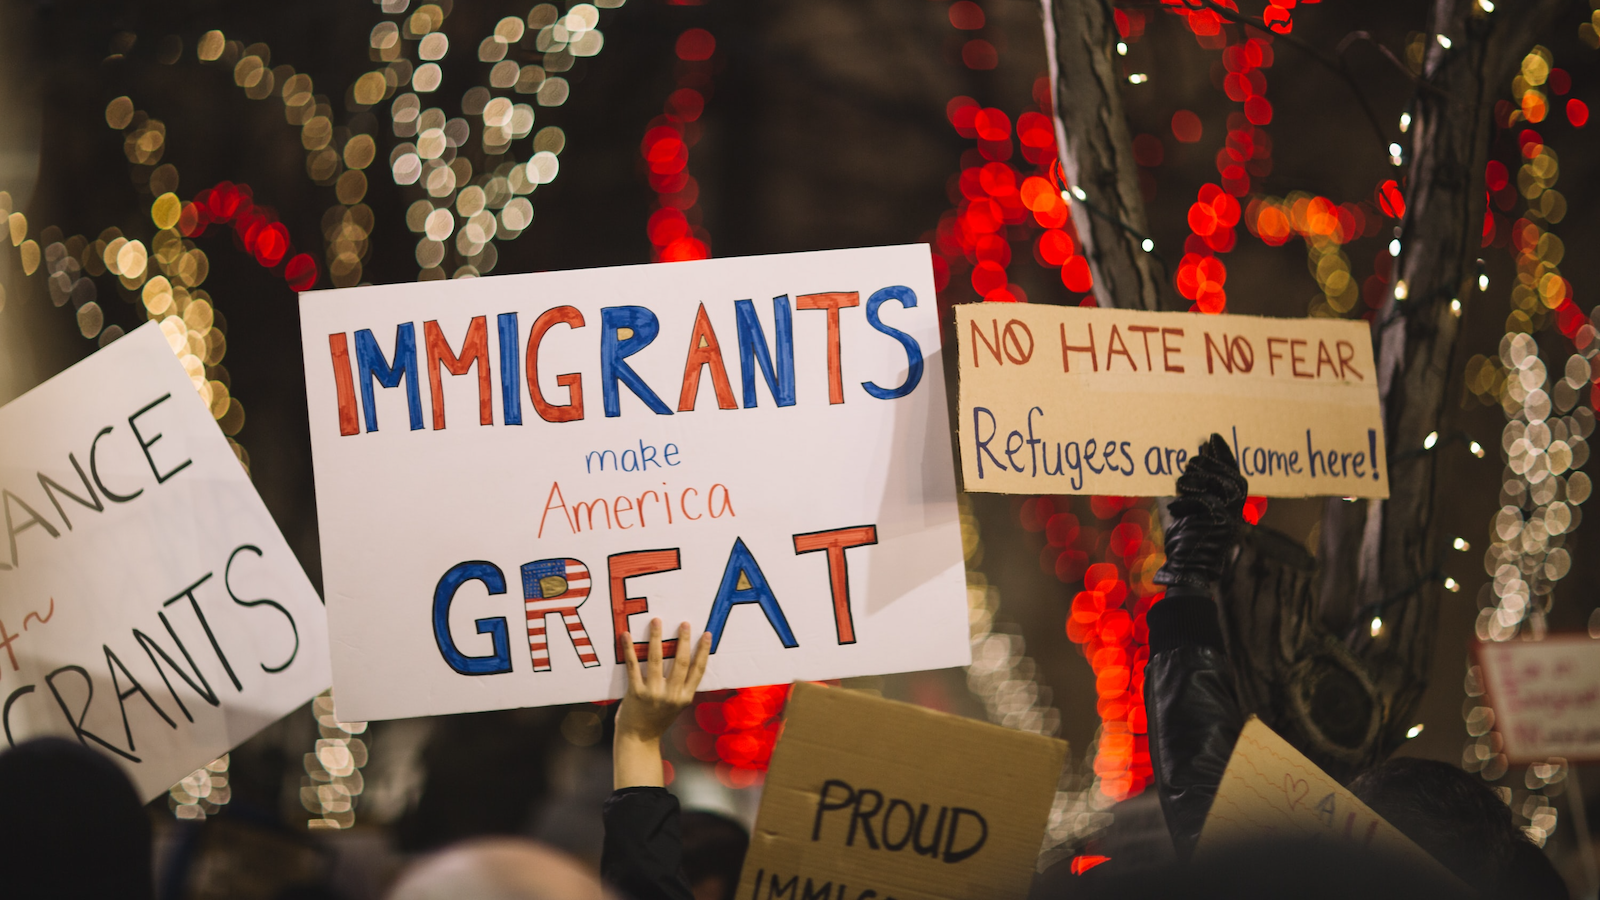 Partnership for Immigrants’ Rights